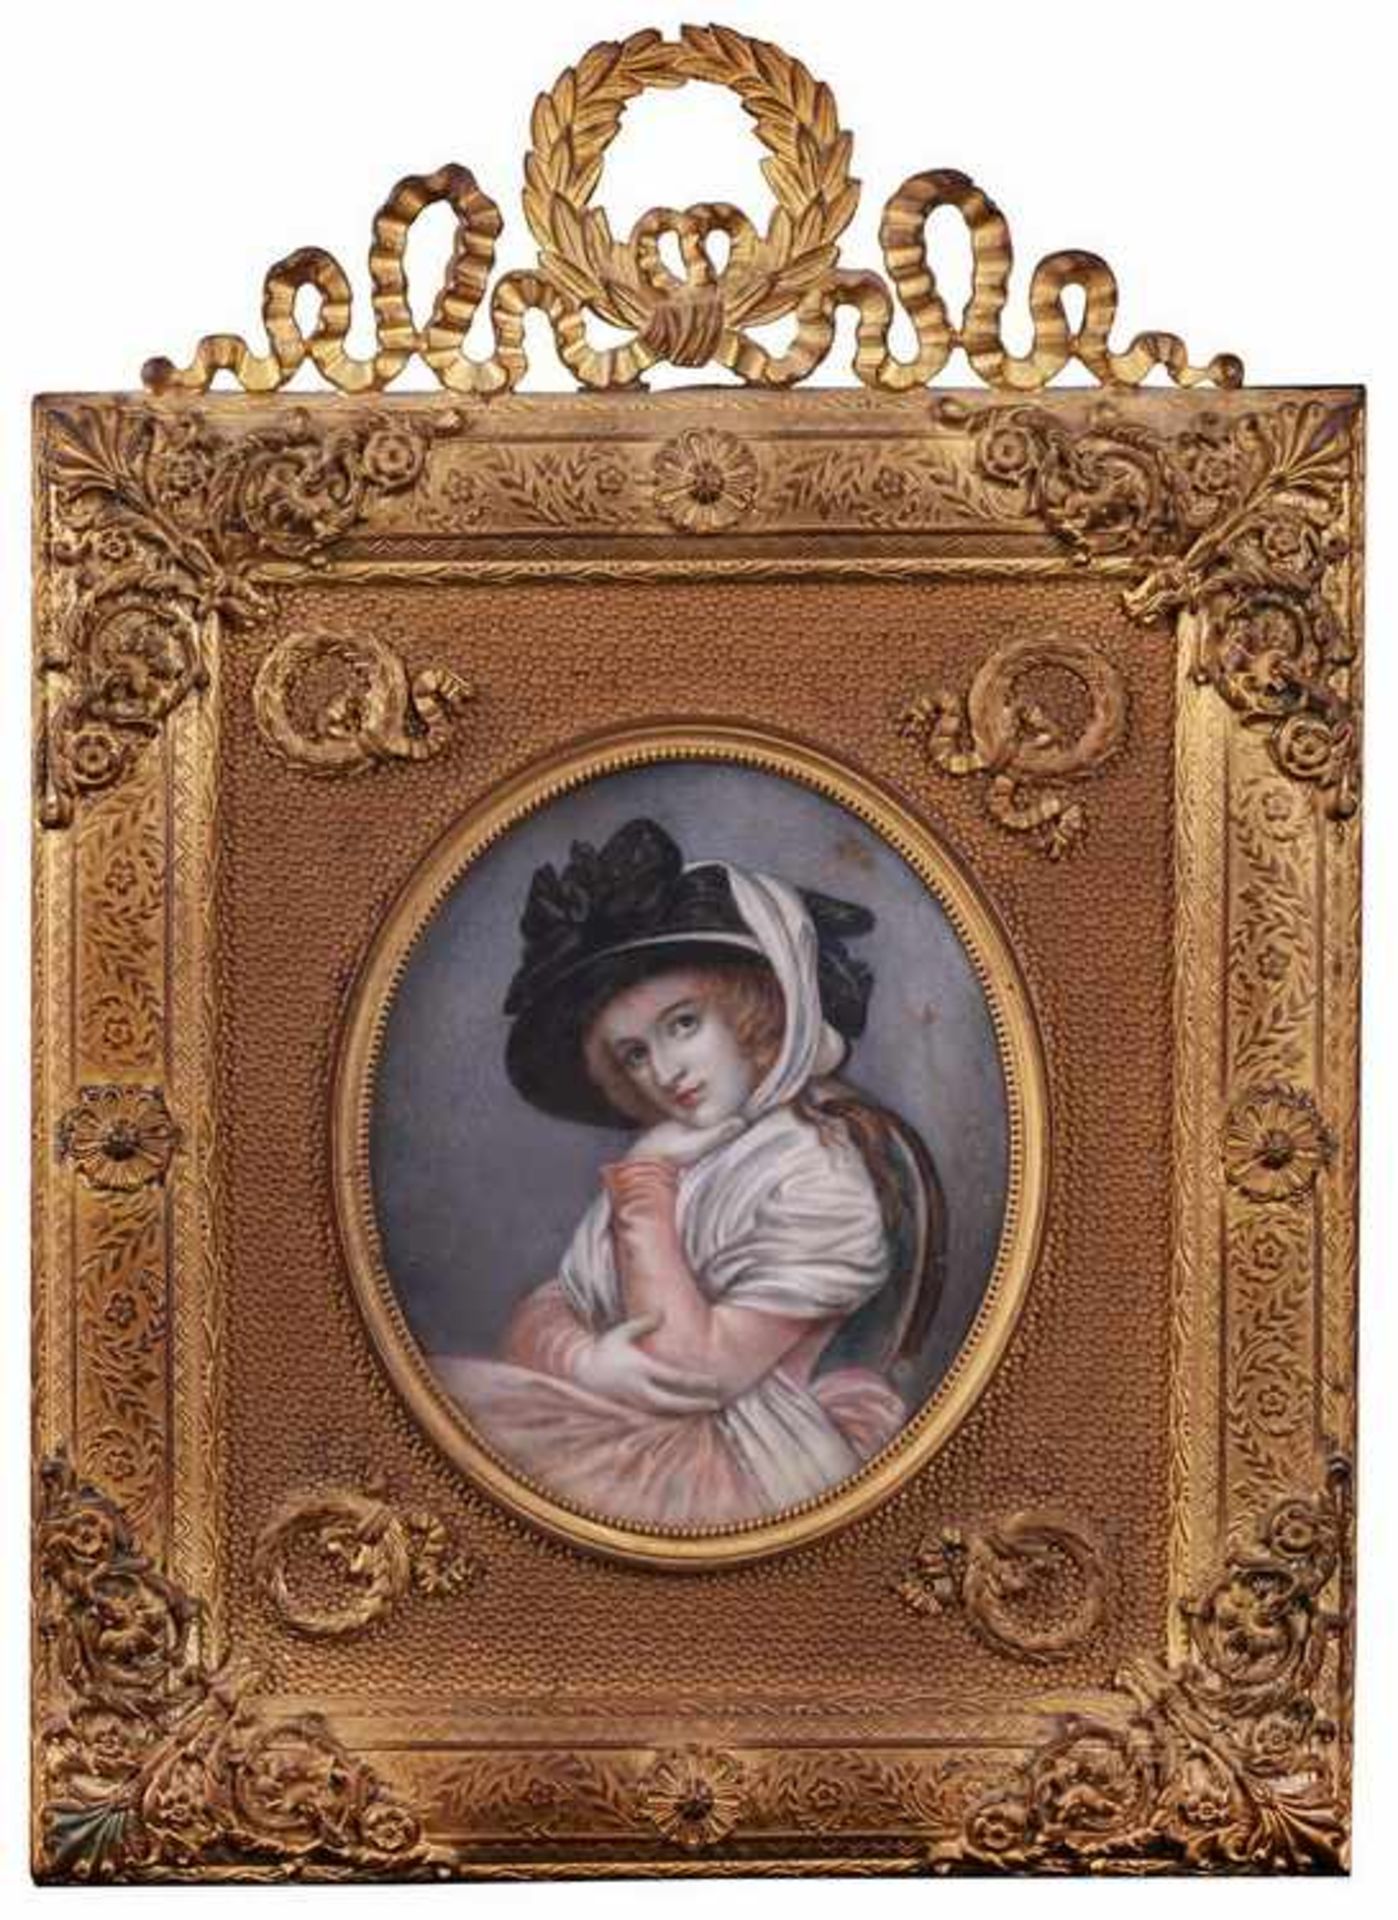 Portrait of an Unknown Woman with a hat. Porcelain painting. [XIX century].Europe. Framed. 14,5x12,8